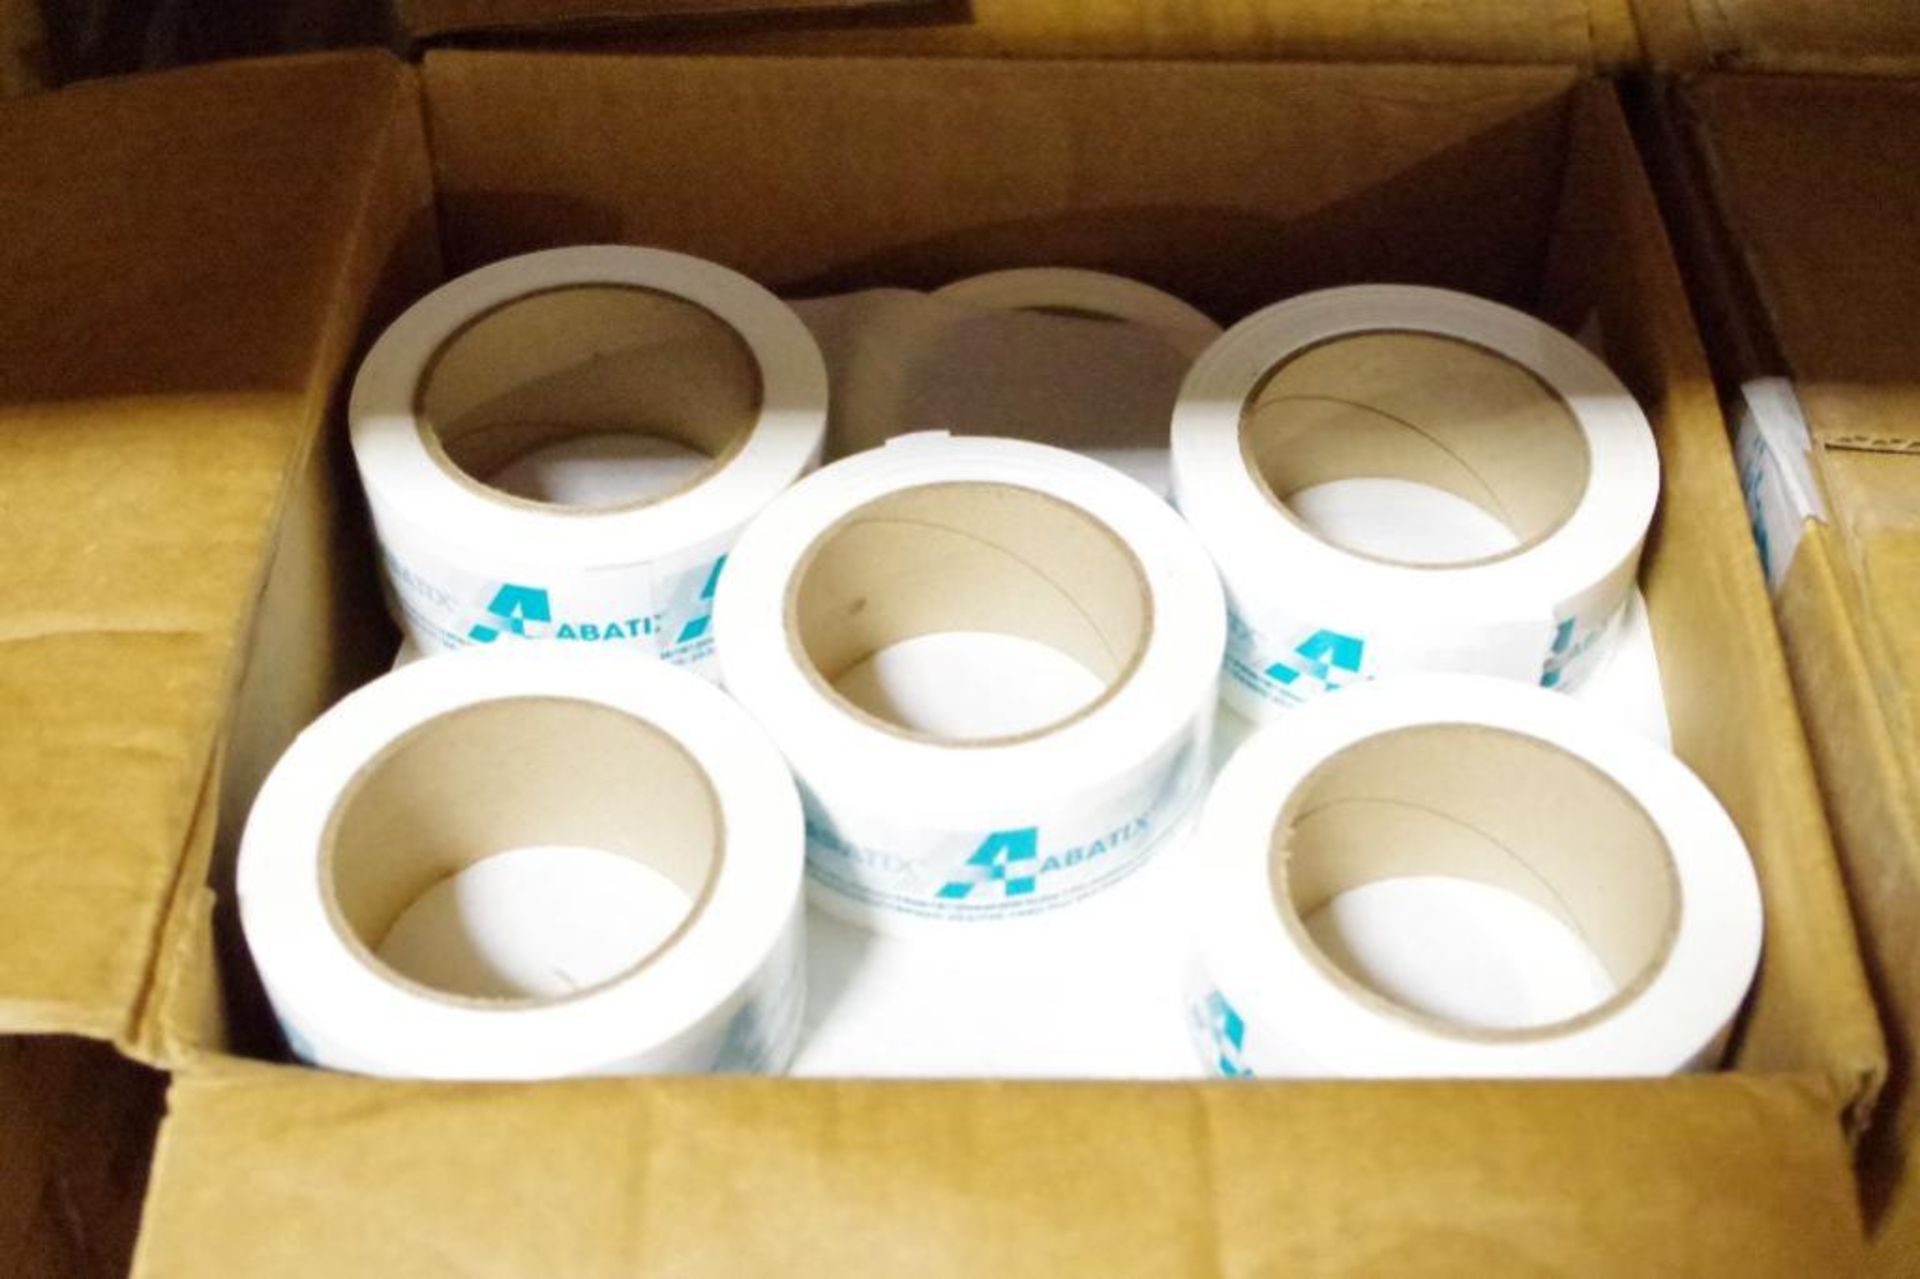 [300+] Branded Shipping Tape Rolls, 1.9" x 328'